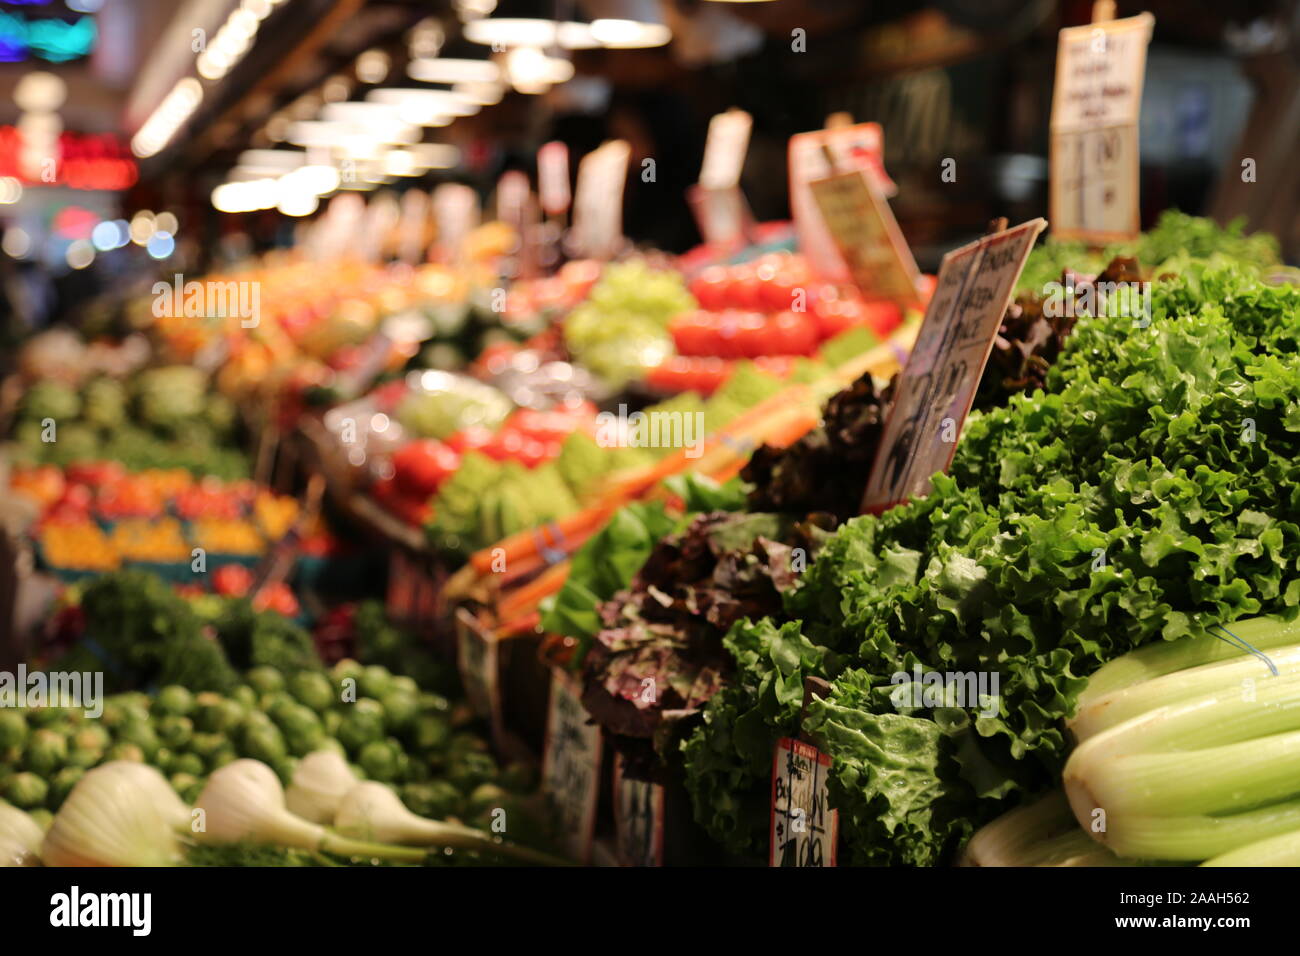 Colorful vegetables in a market taken by camera canon 5D mark III in Seattle USA Stock Photo